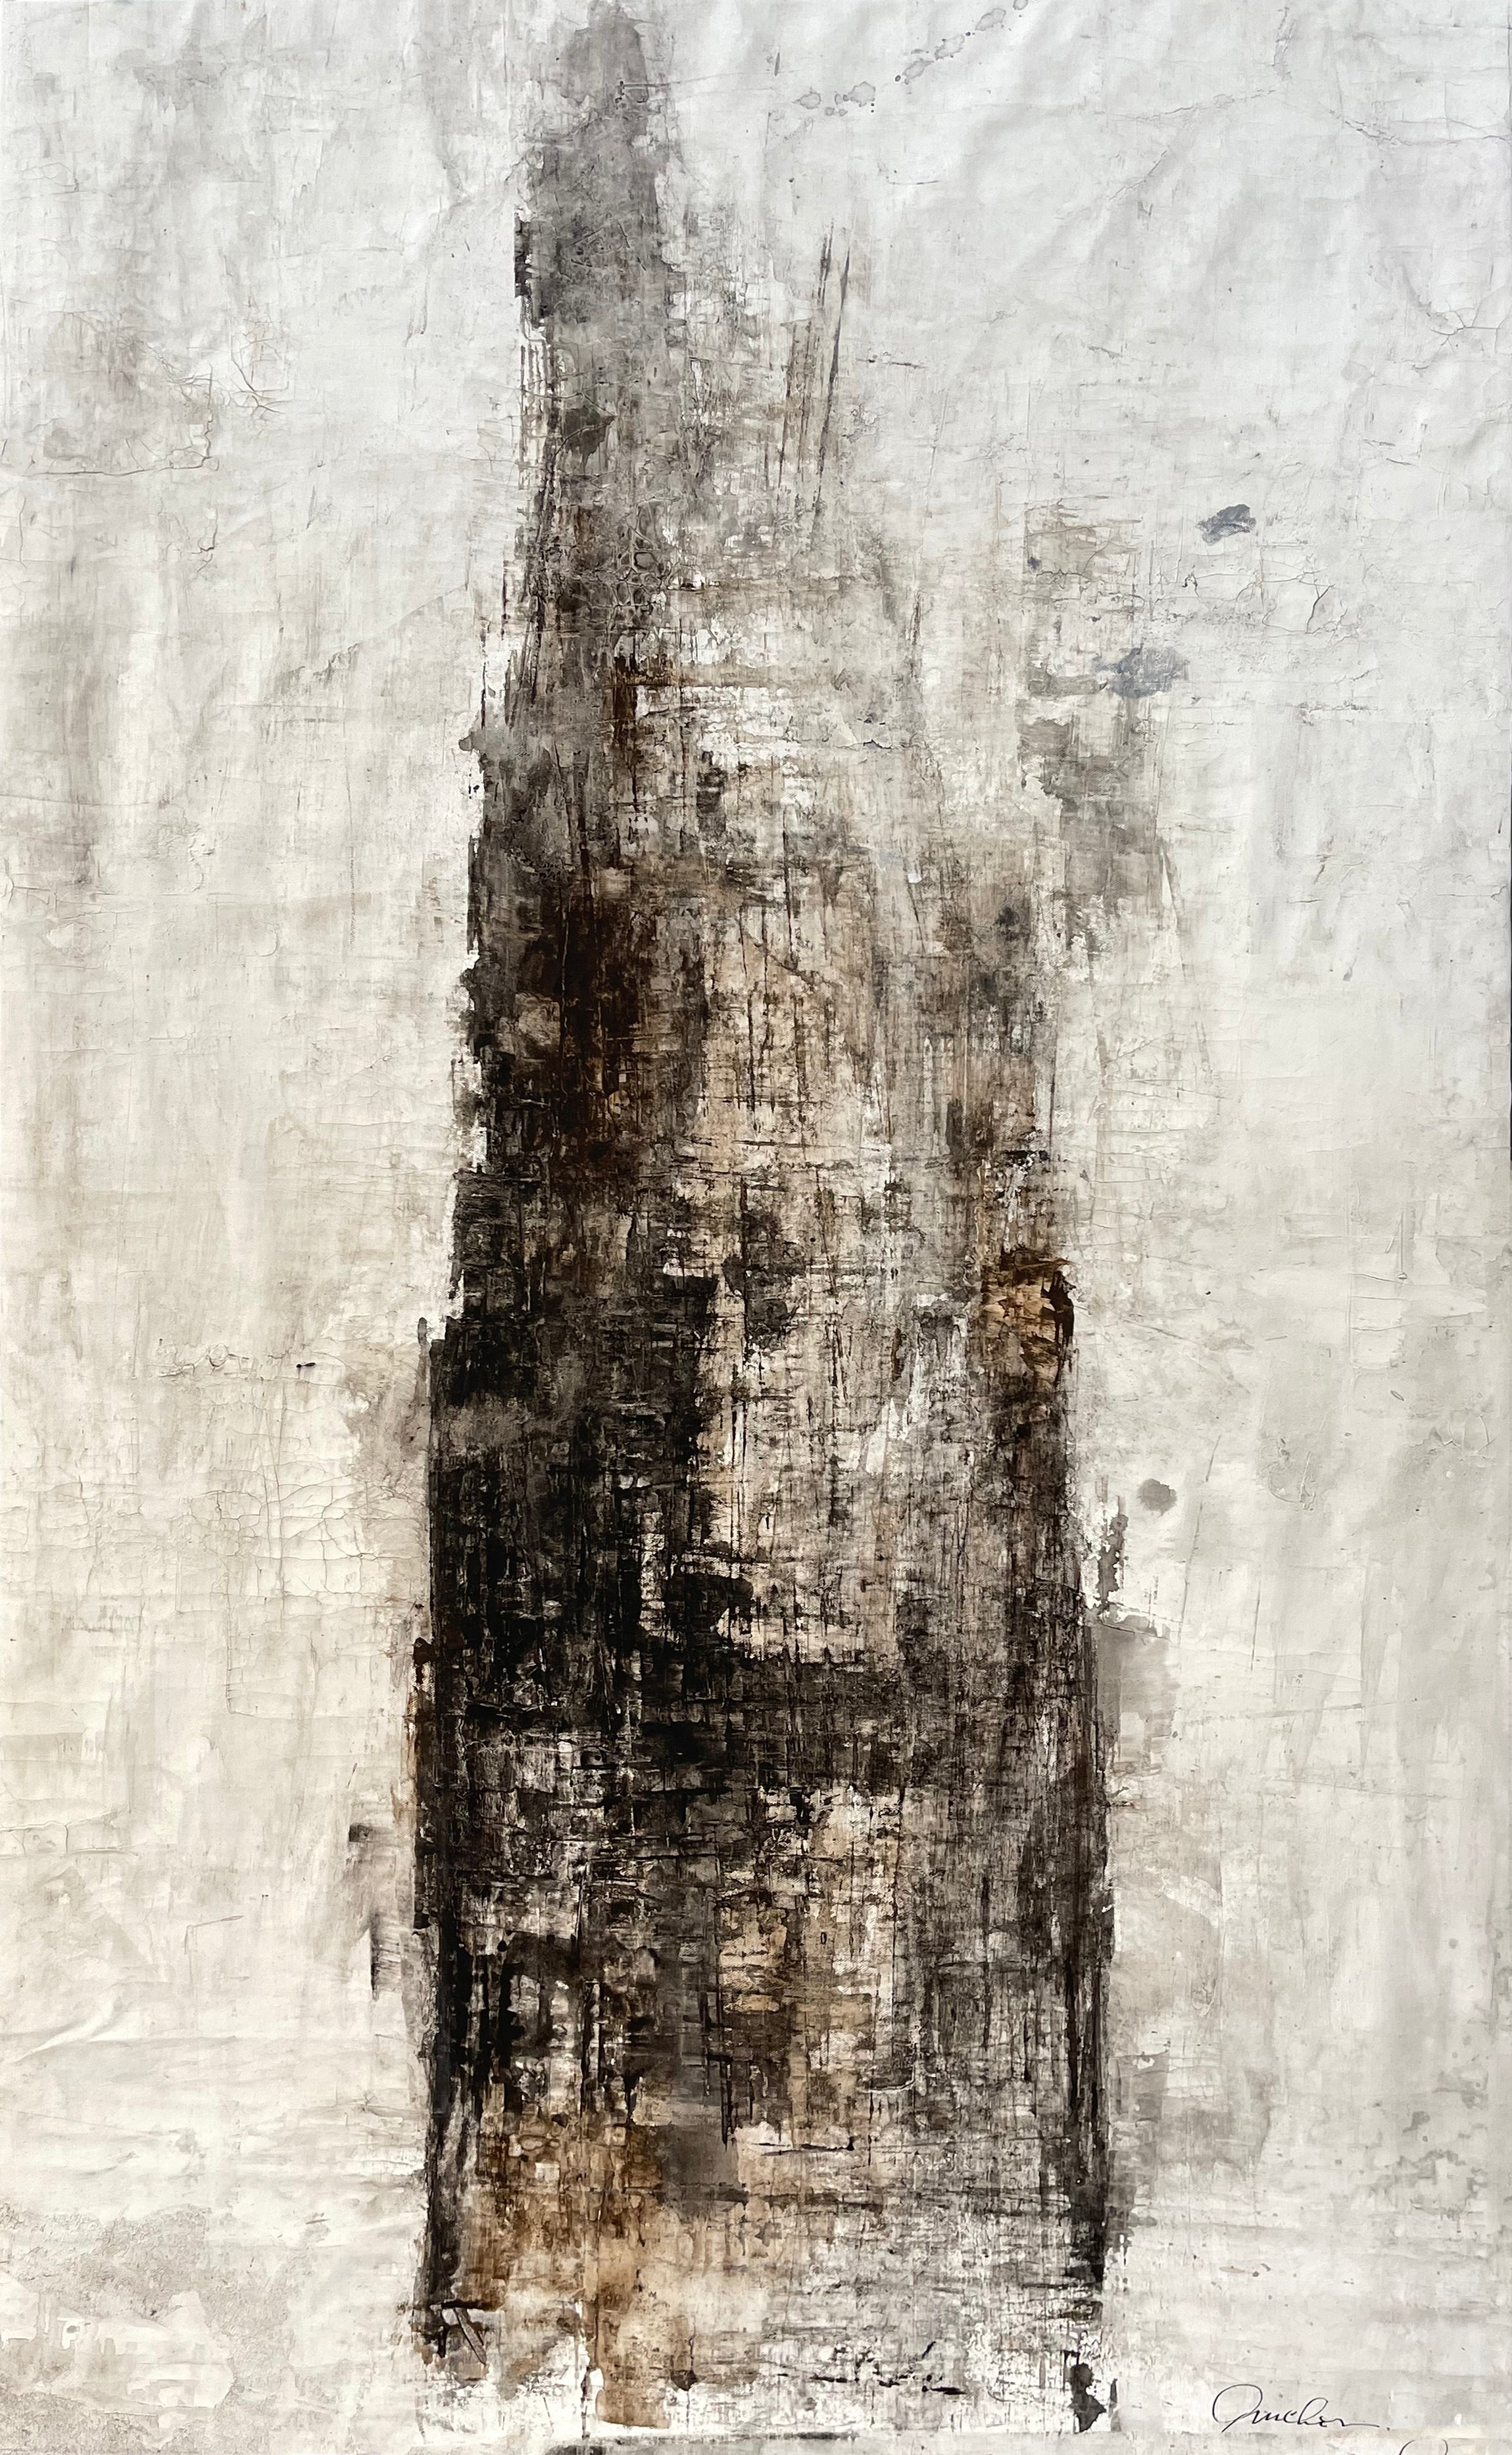 Once Upon a Time represents a relic of peace and simplicity. Highly textured neutral tones created with paint, ink, charcoal and plaster adorn the canvas. The overall look and feel is soft yet powerful, stoic, and tender. Another favorite on Truchon's personal list.